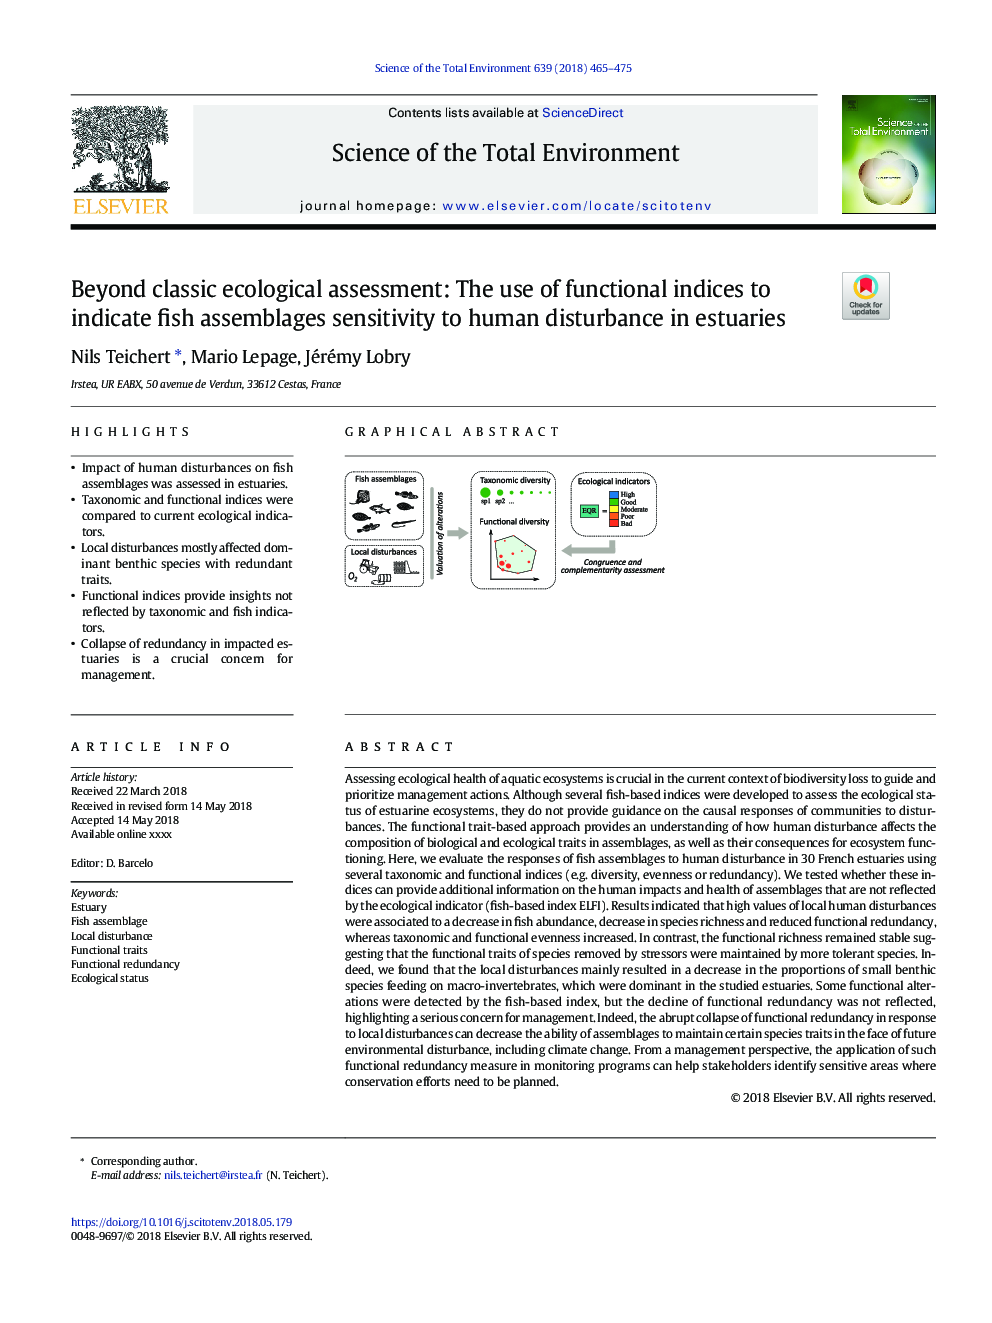 Beyond classic ecological assessment: The use of functional indices to indicate fish assemblages sensitivity to human disturbance in estuaries